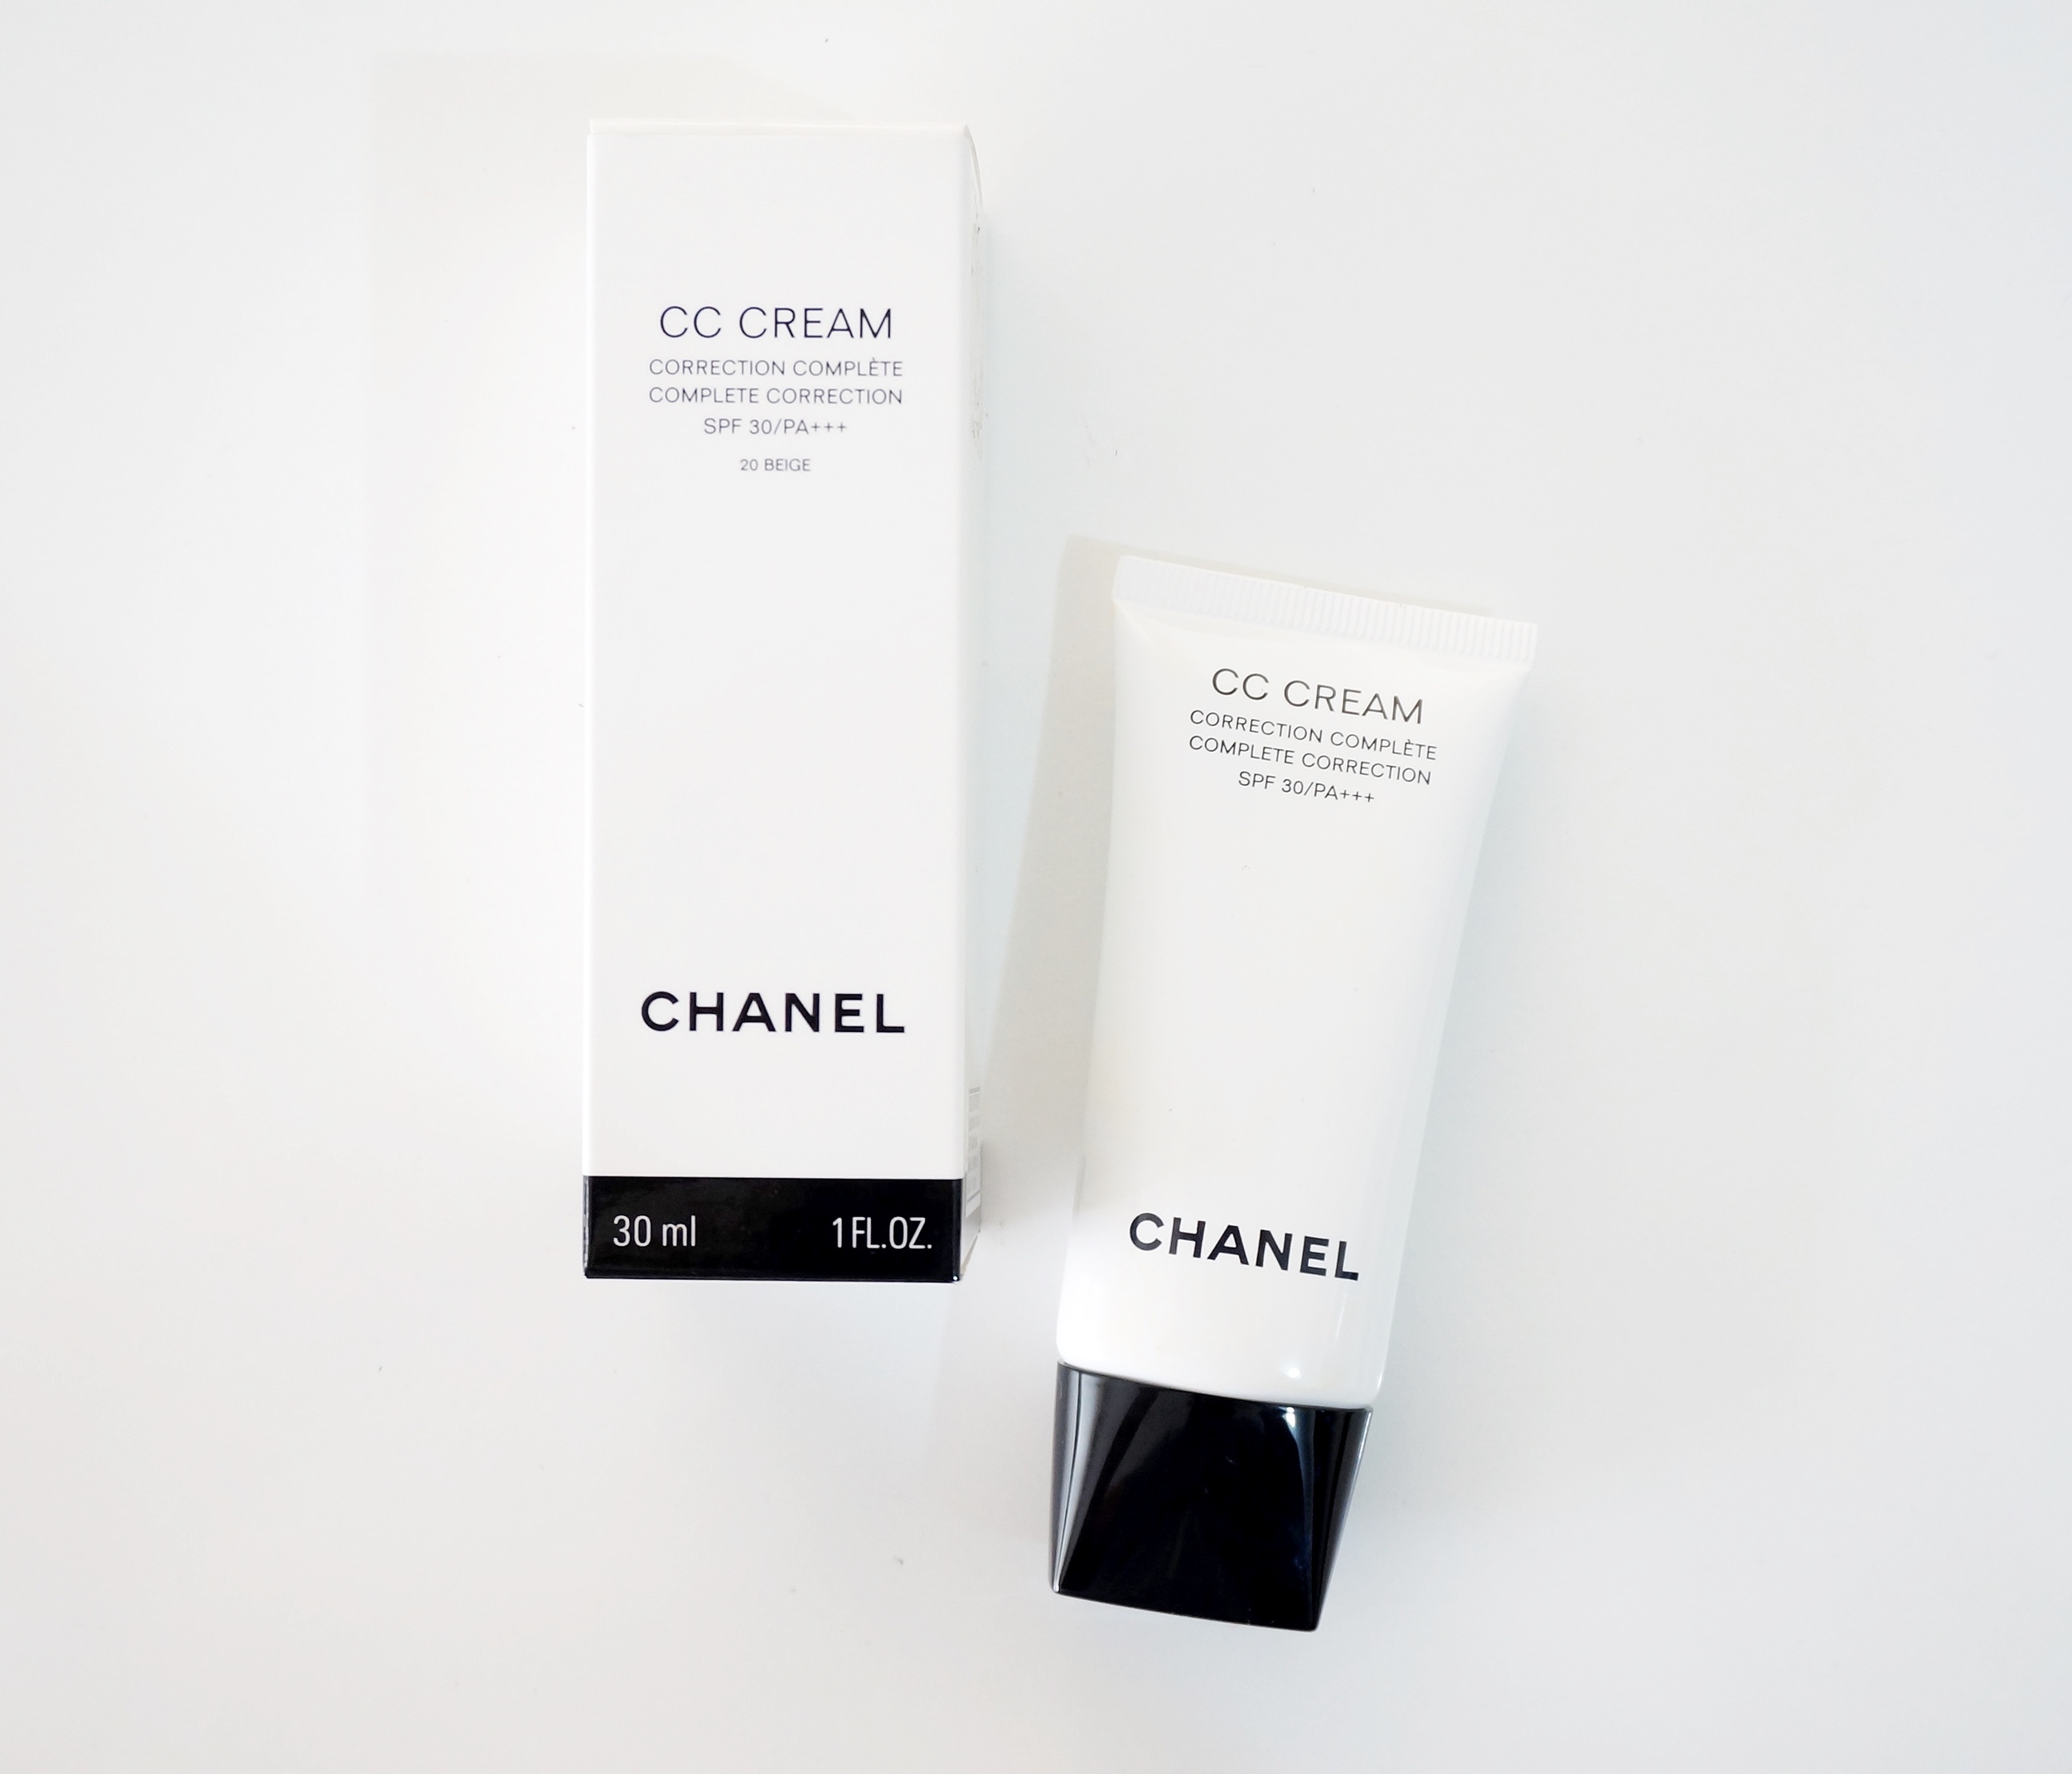 A glow to spend for: the Chanel CC Cream — Project Vanity